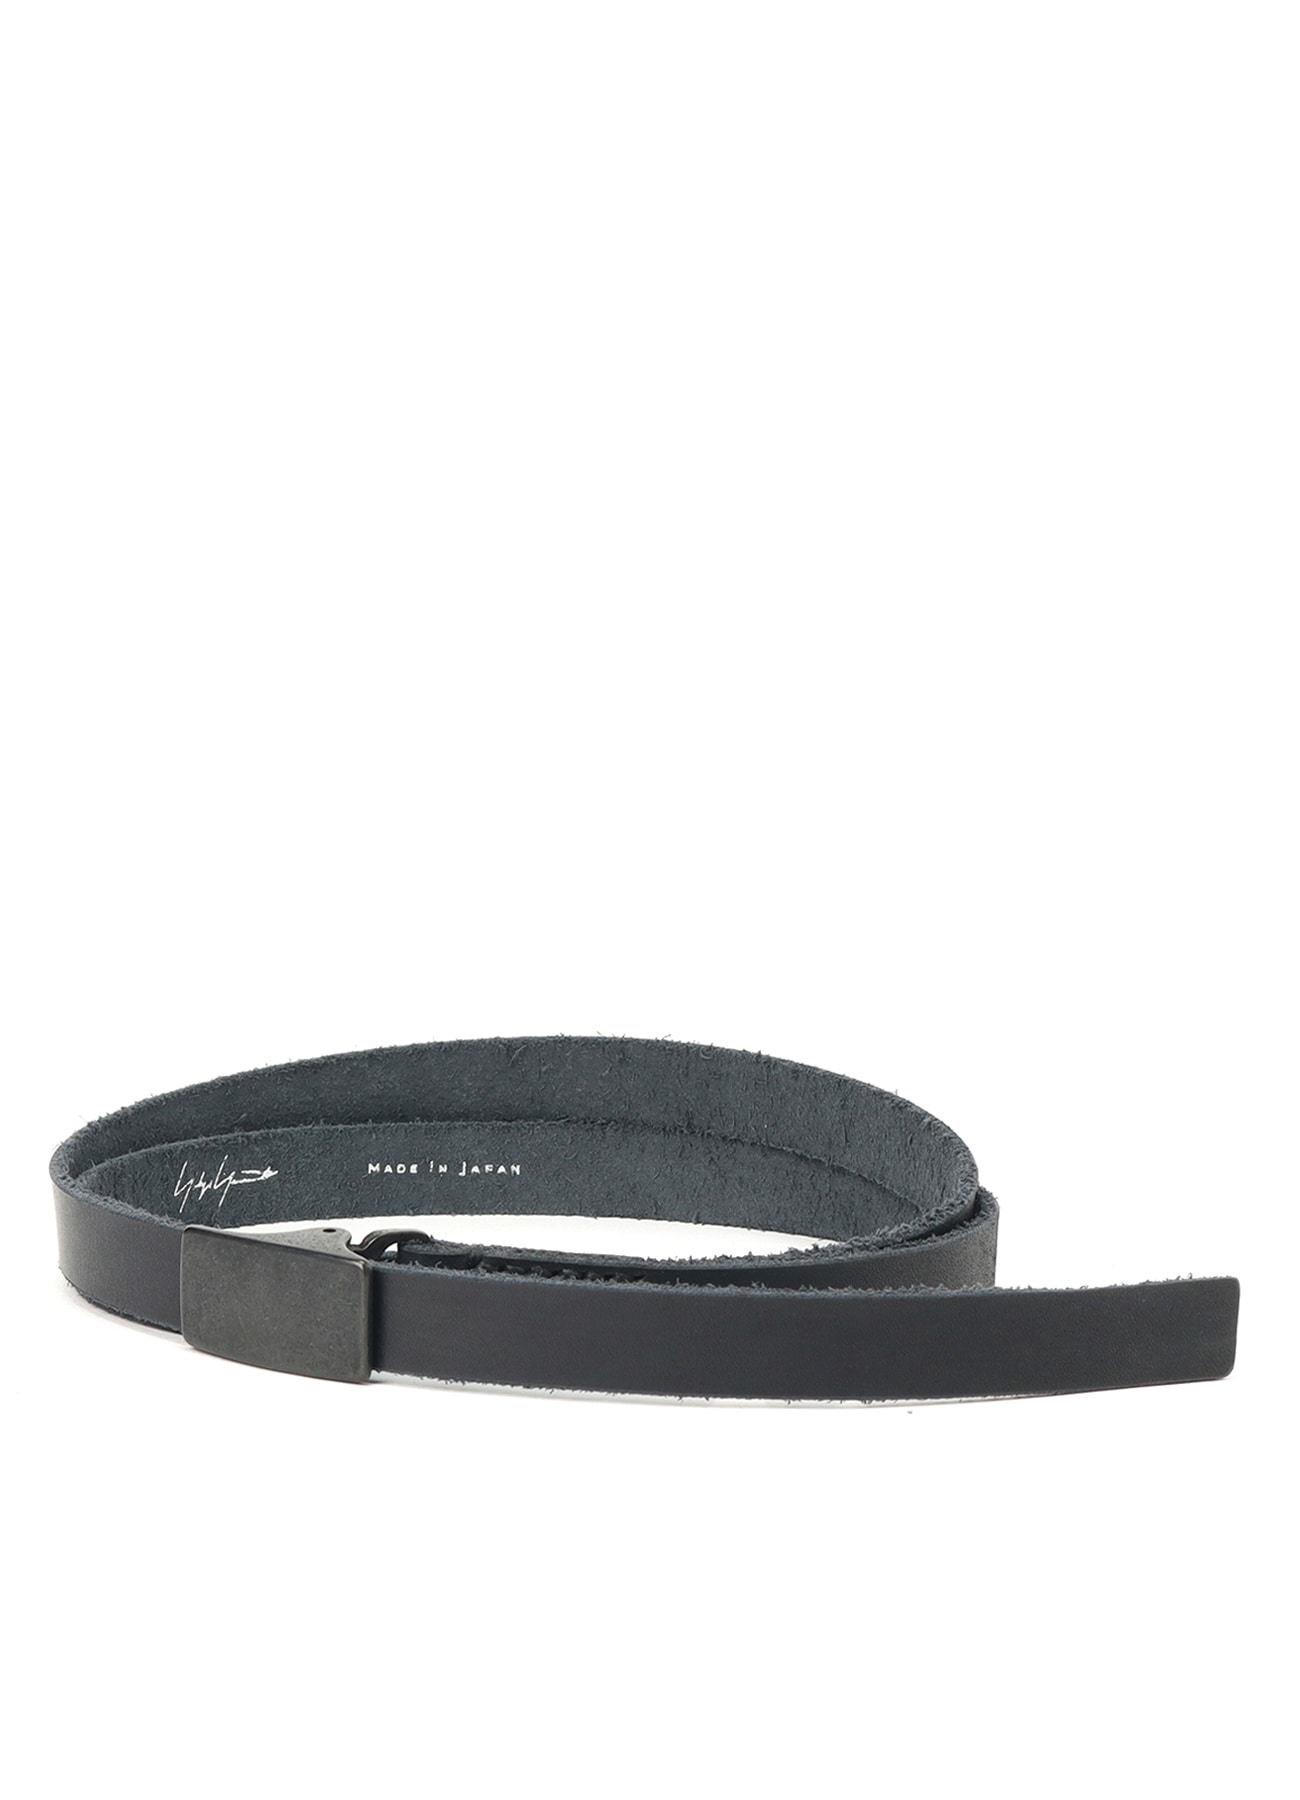 THICKNUME 18MM FREE BELT(M Brown): Yohji Yamamoto POUR HOMME｜THE 